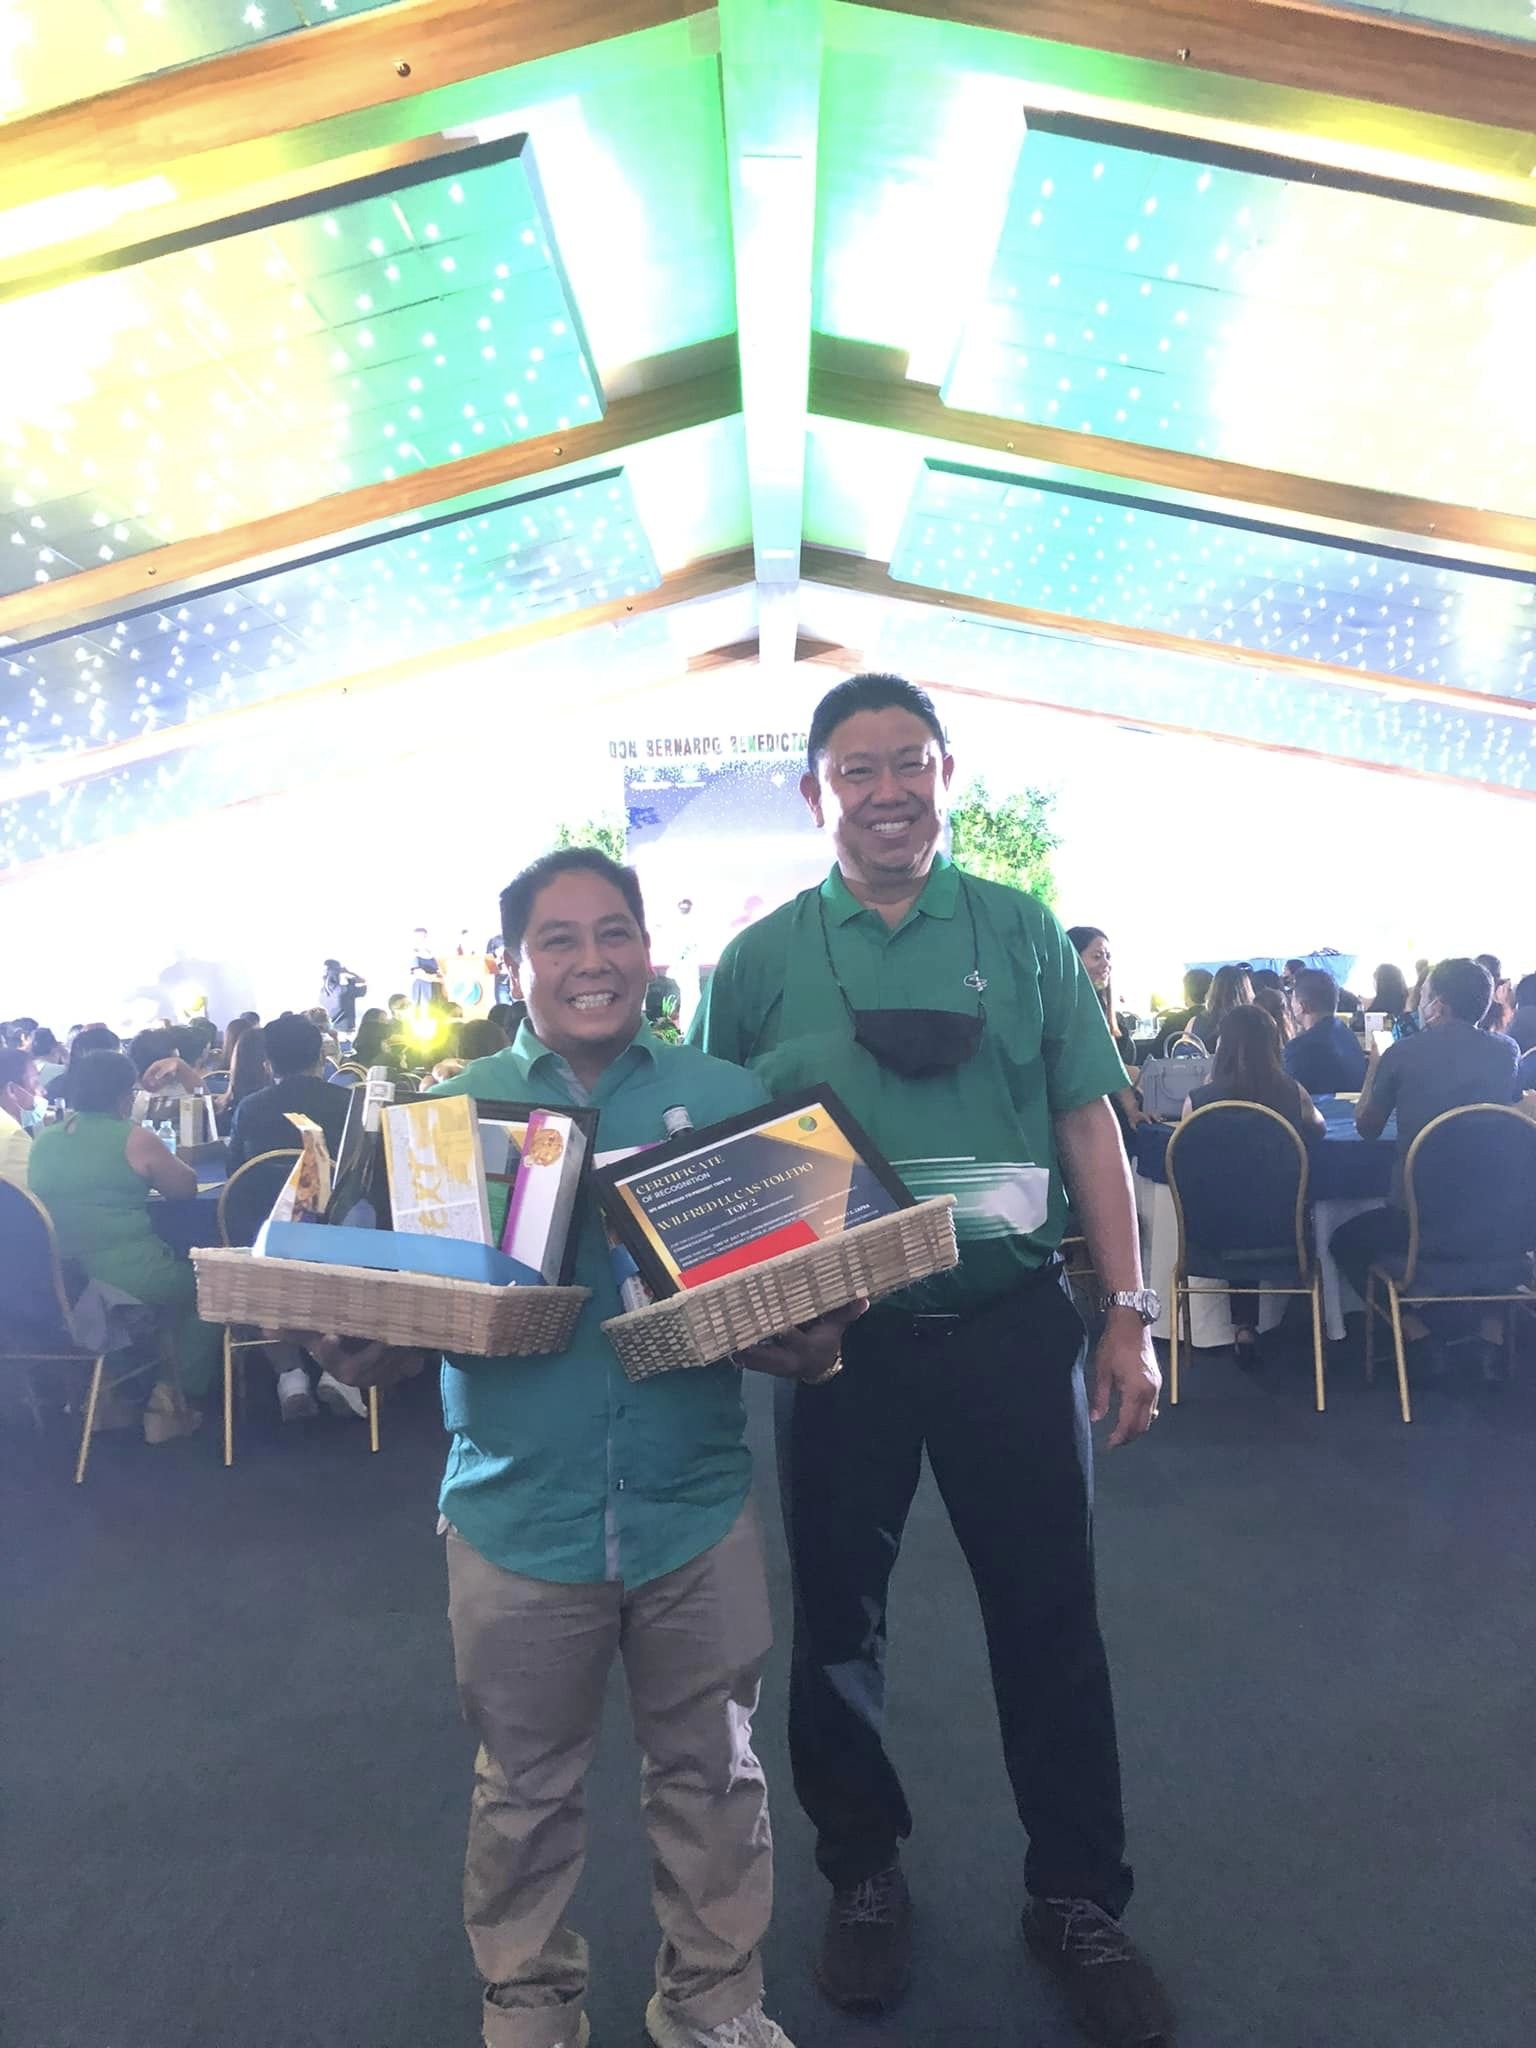 AWARDS & RECOGNITION GIVEN BY EASTLAND ESTATE LILOAN